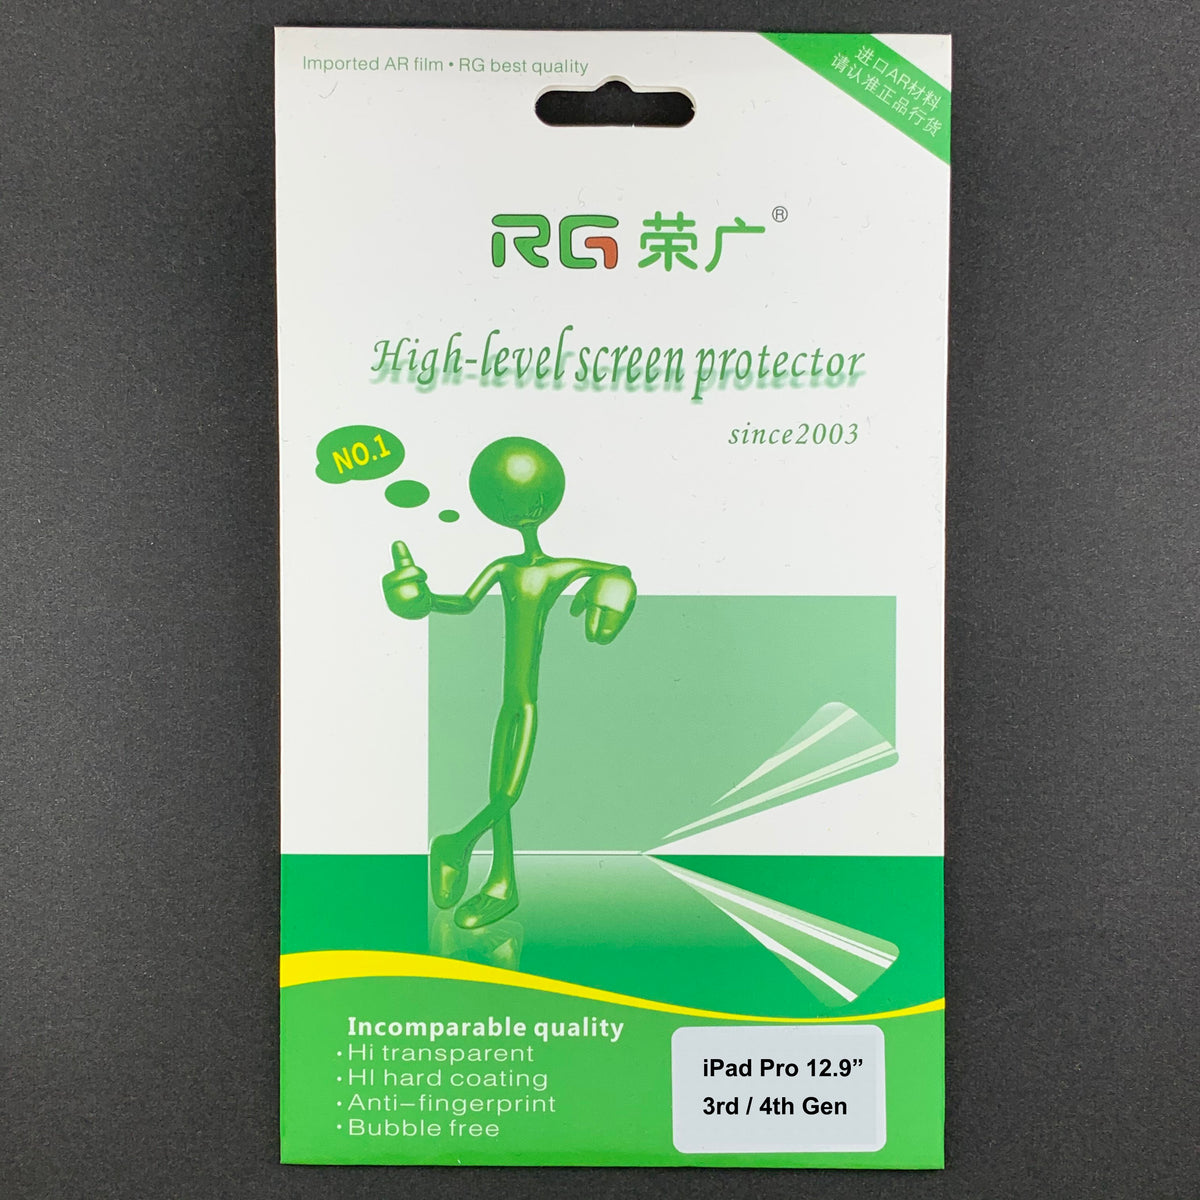 RG Professional Soft Film Screen Protector for iPad Pro 12.9&quot; 3rd / 4th Gen (CLEAR, 2-PACK)